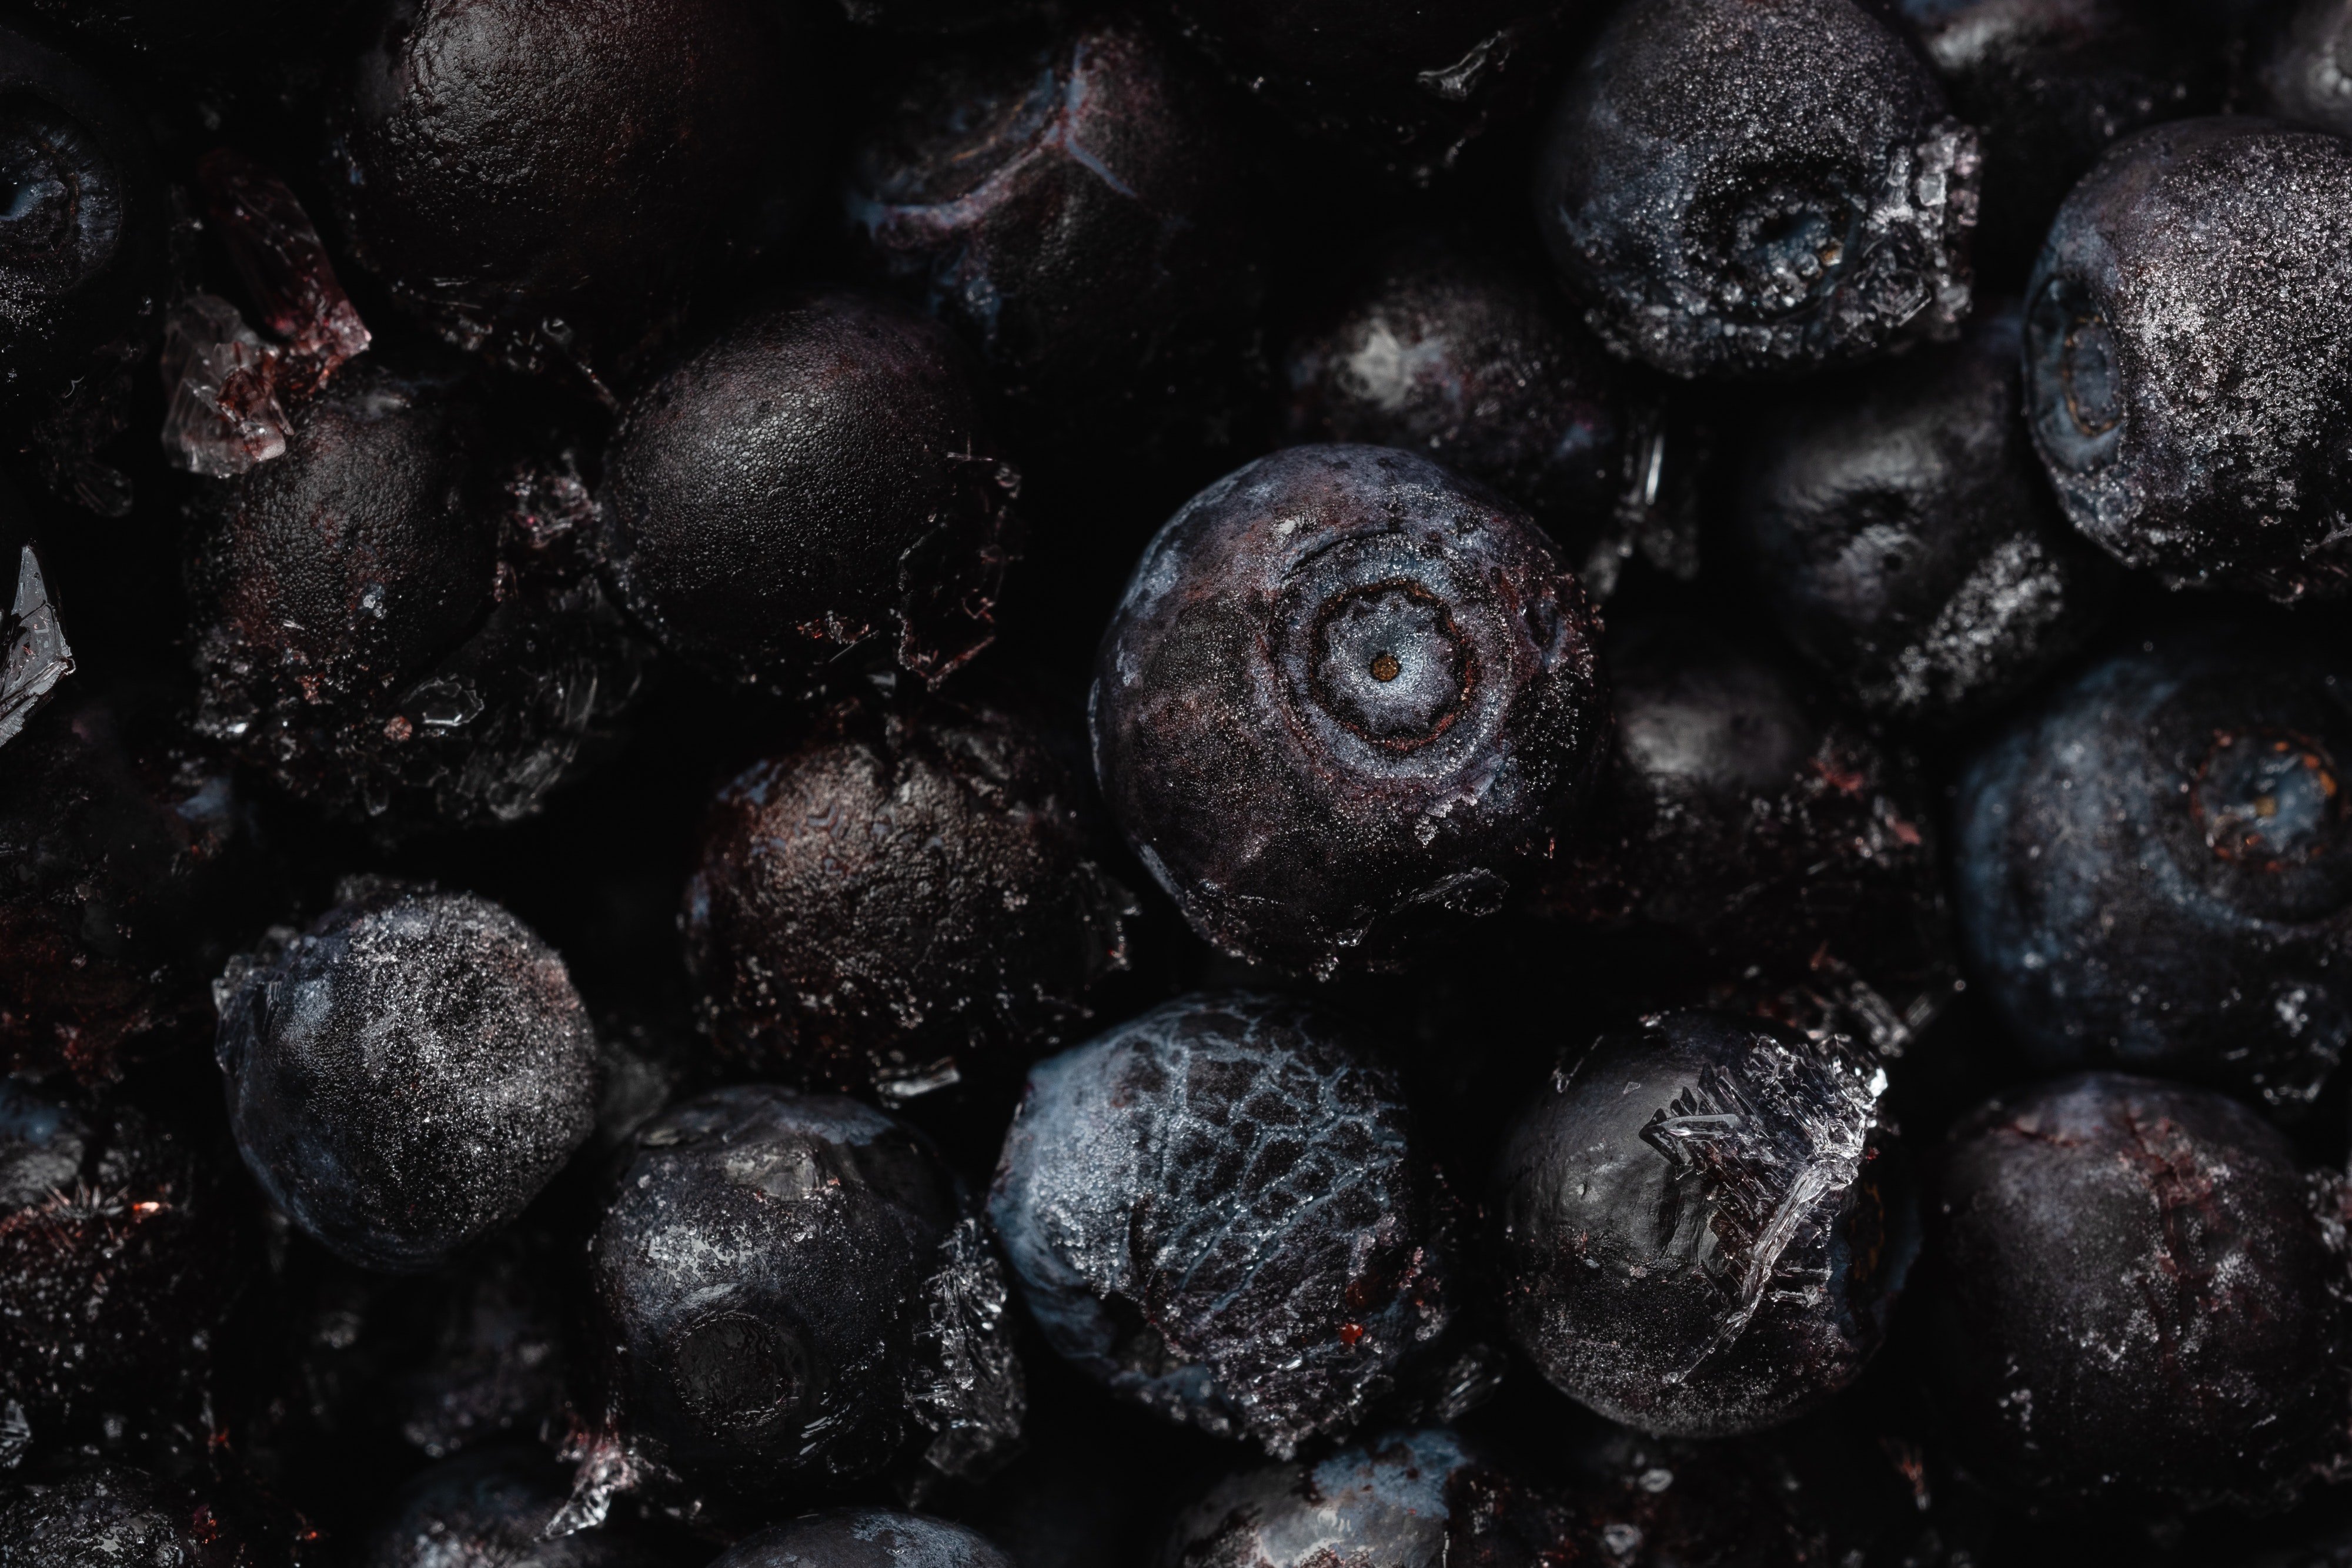 Donna ate the berries that the man had picked earlier in the day. | Source: Pexels